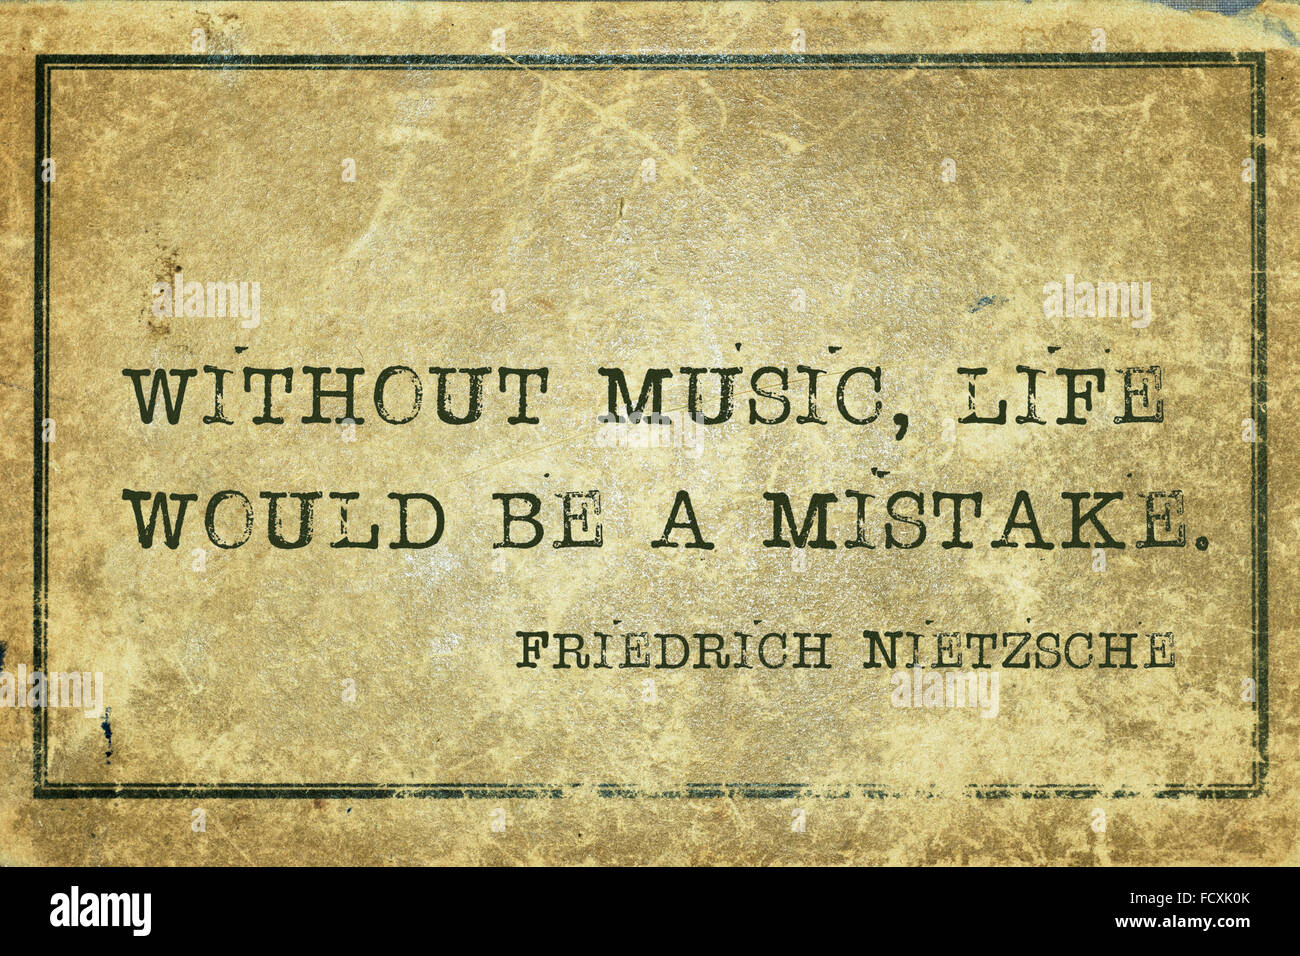 Without music, life would be a mistake - ancient German philosopher Friedrich Nietzsche quote printed on grunge vintage cardboar Stock Photo